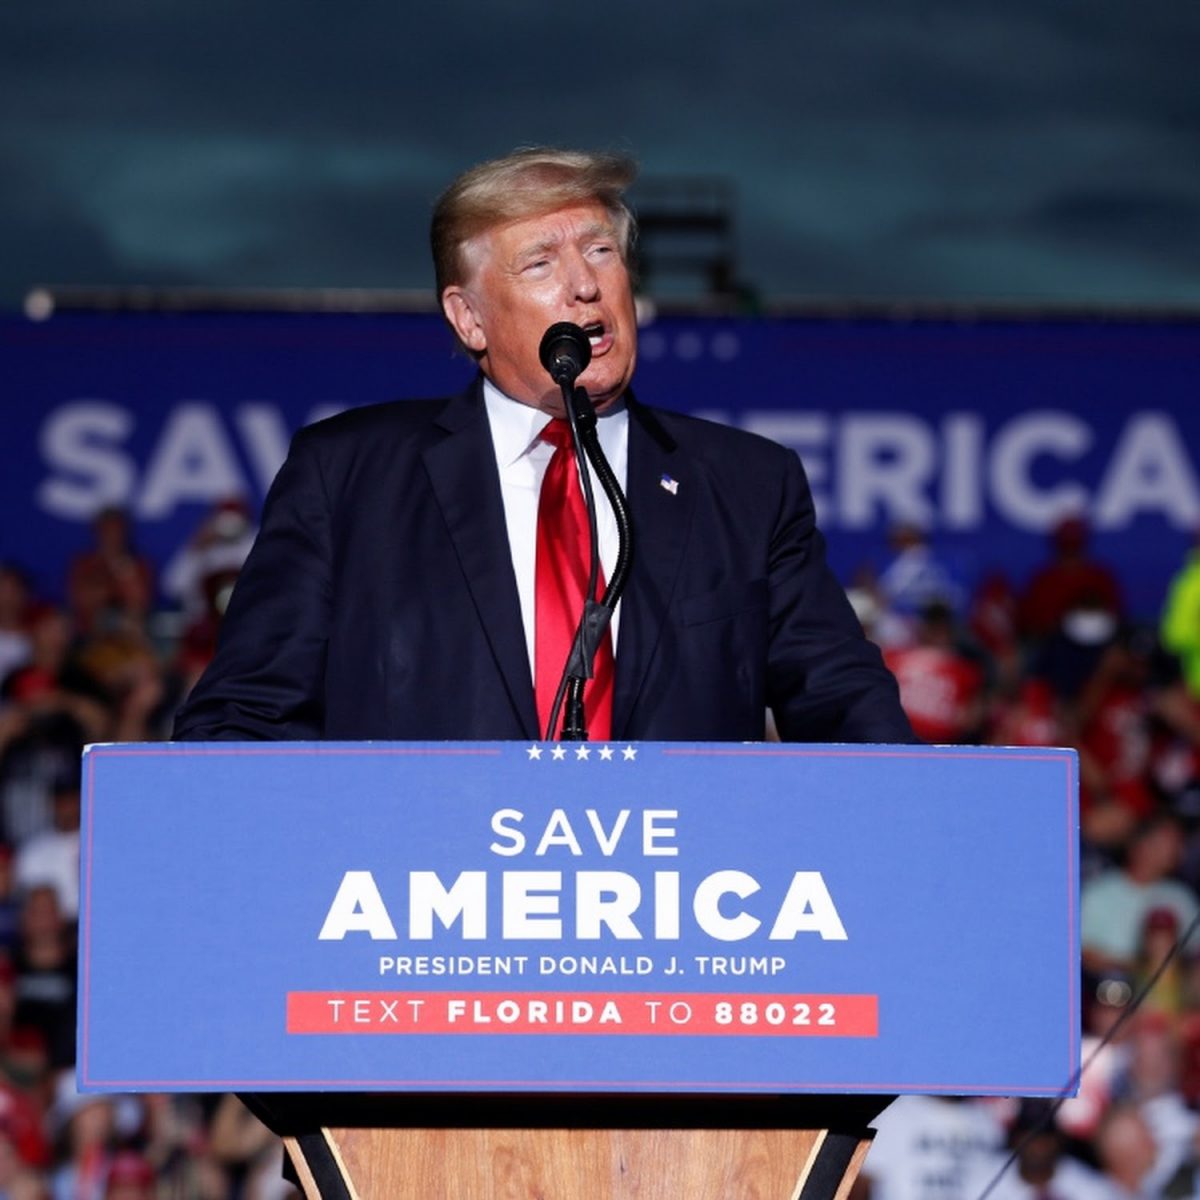 Former President Donald Trump speaks to his supporters during the Save America Rally at the Sarasota Fairgrounds in Sarasota, Florida, US July 3, 2021.
Image: OCTAVIO JONES
